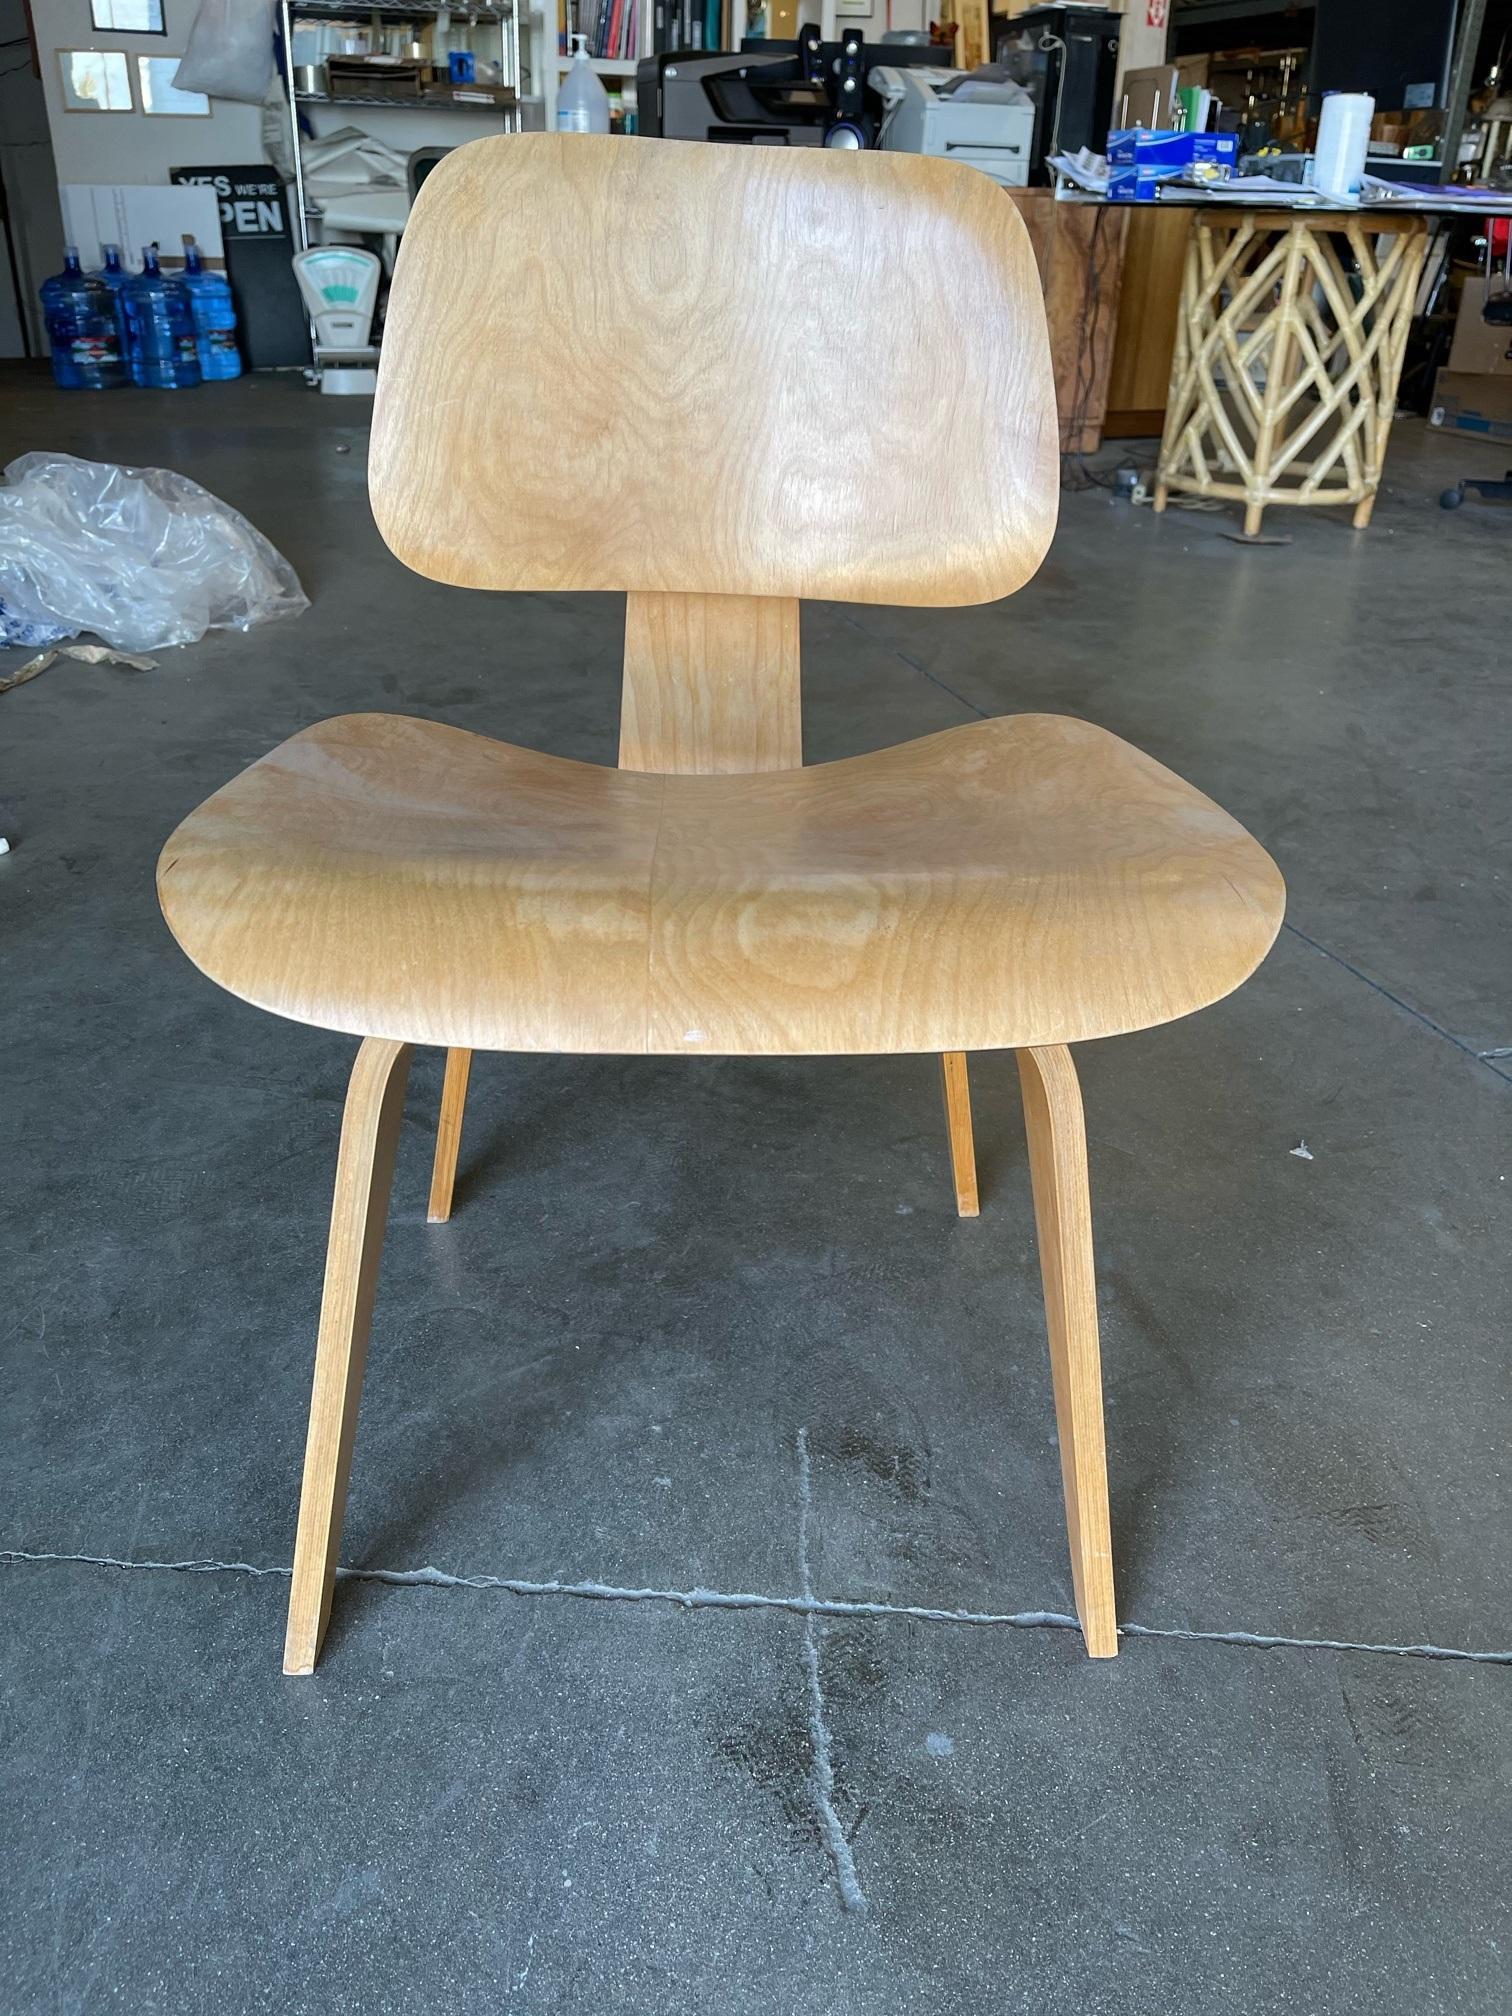 This pair of early 1948 DCW chairs designed by Charles and Ray Eames for Herman Miller. Both pieces have their original Evans Foil Labels used by Herman Miller from 1947-1950. Both chairs have early single rubber shock mounts with the 5-2-5 mounting